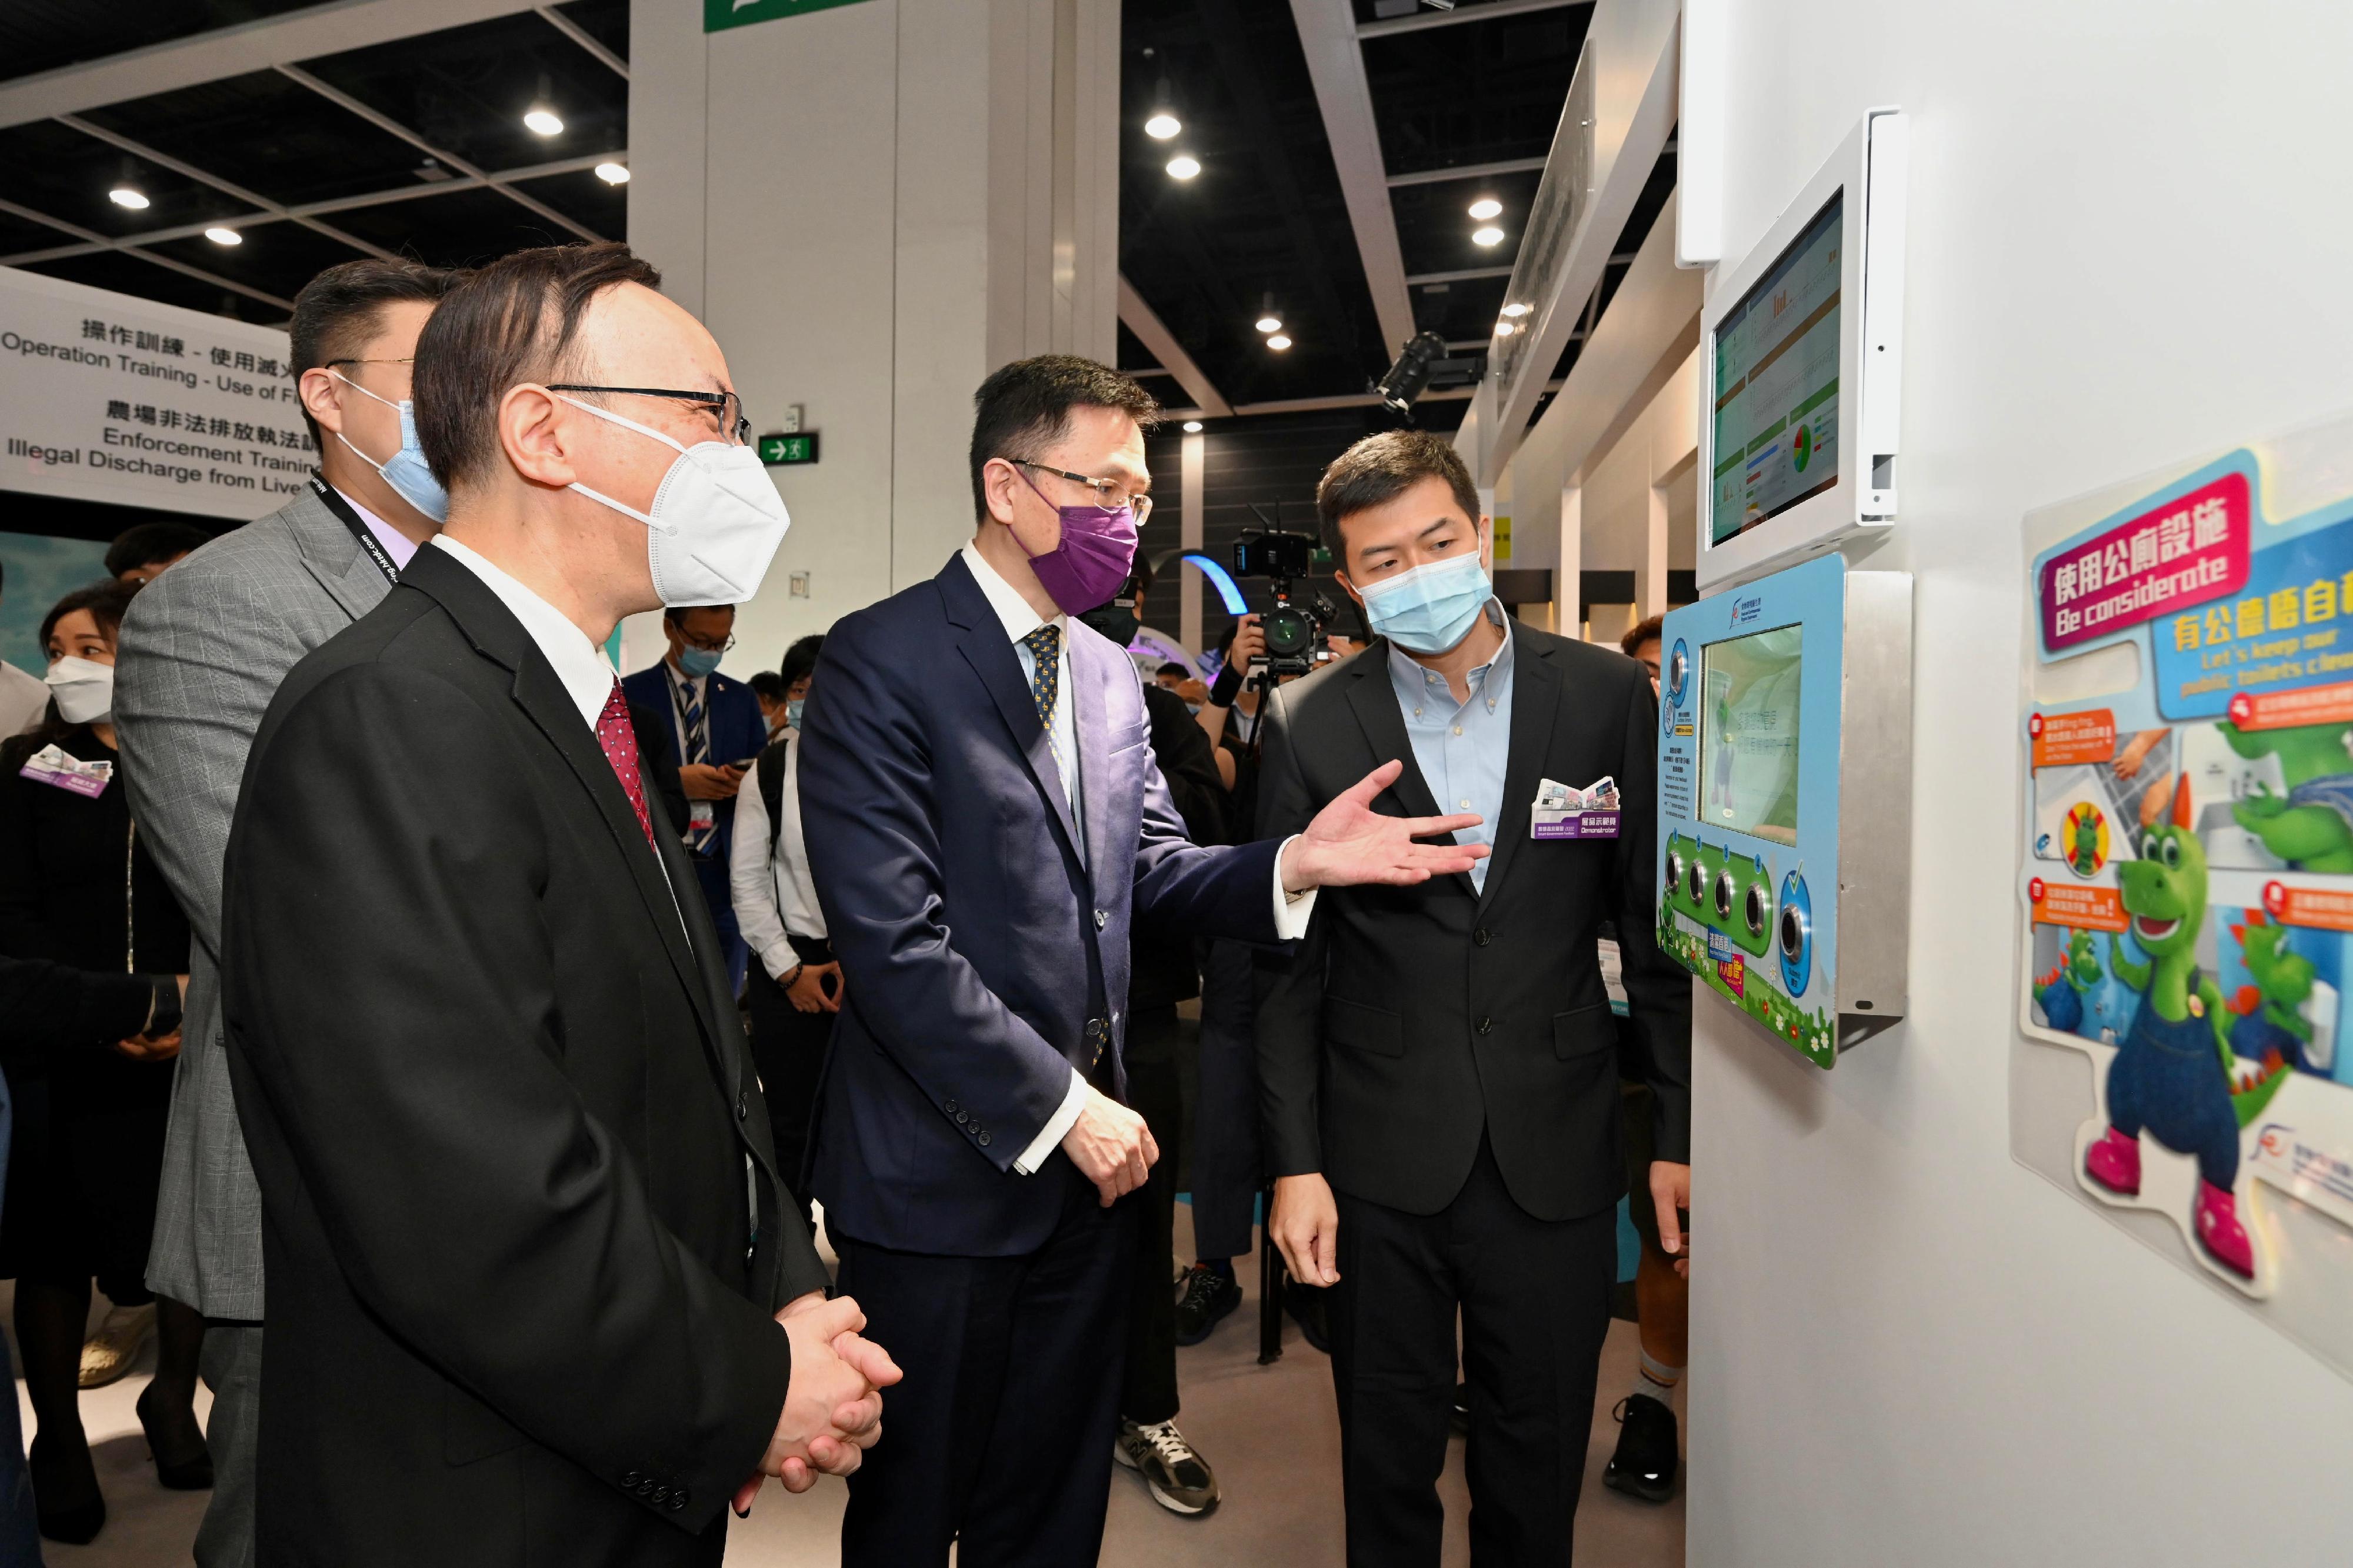 The Secretary for Innovation, Technology and Industry, Professor Sun Dong (second right), visits the Smart Government Pavilion at the International ICT Expo today (October 13) and is briefed on the Smart Toilet Pilot Programme.